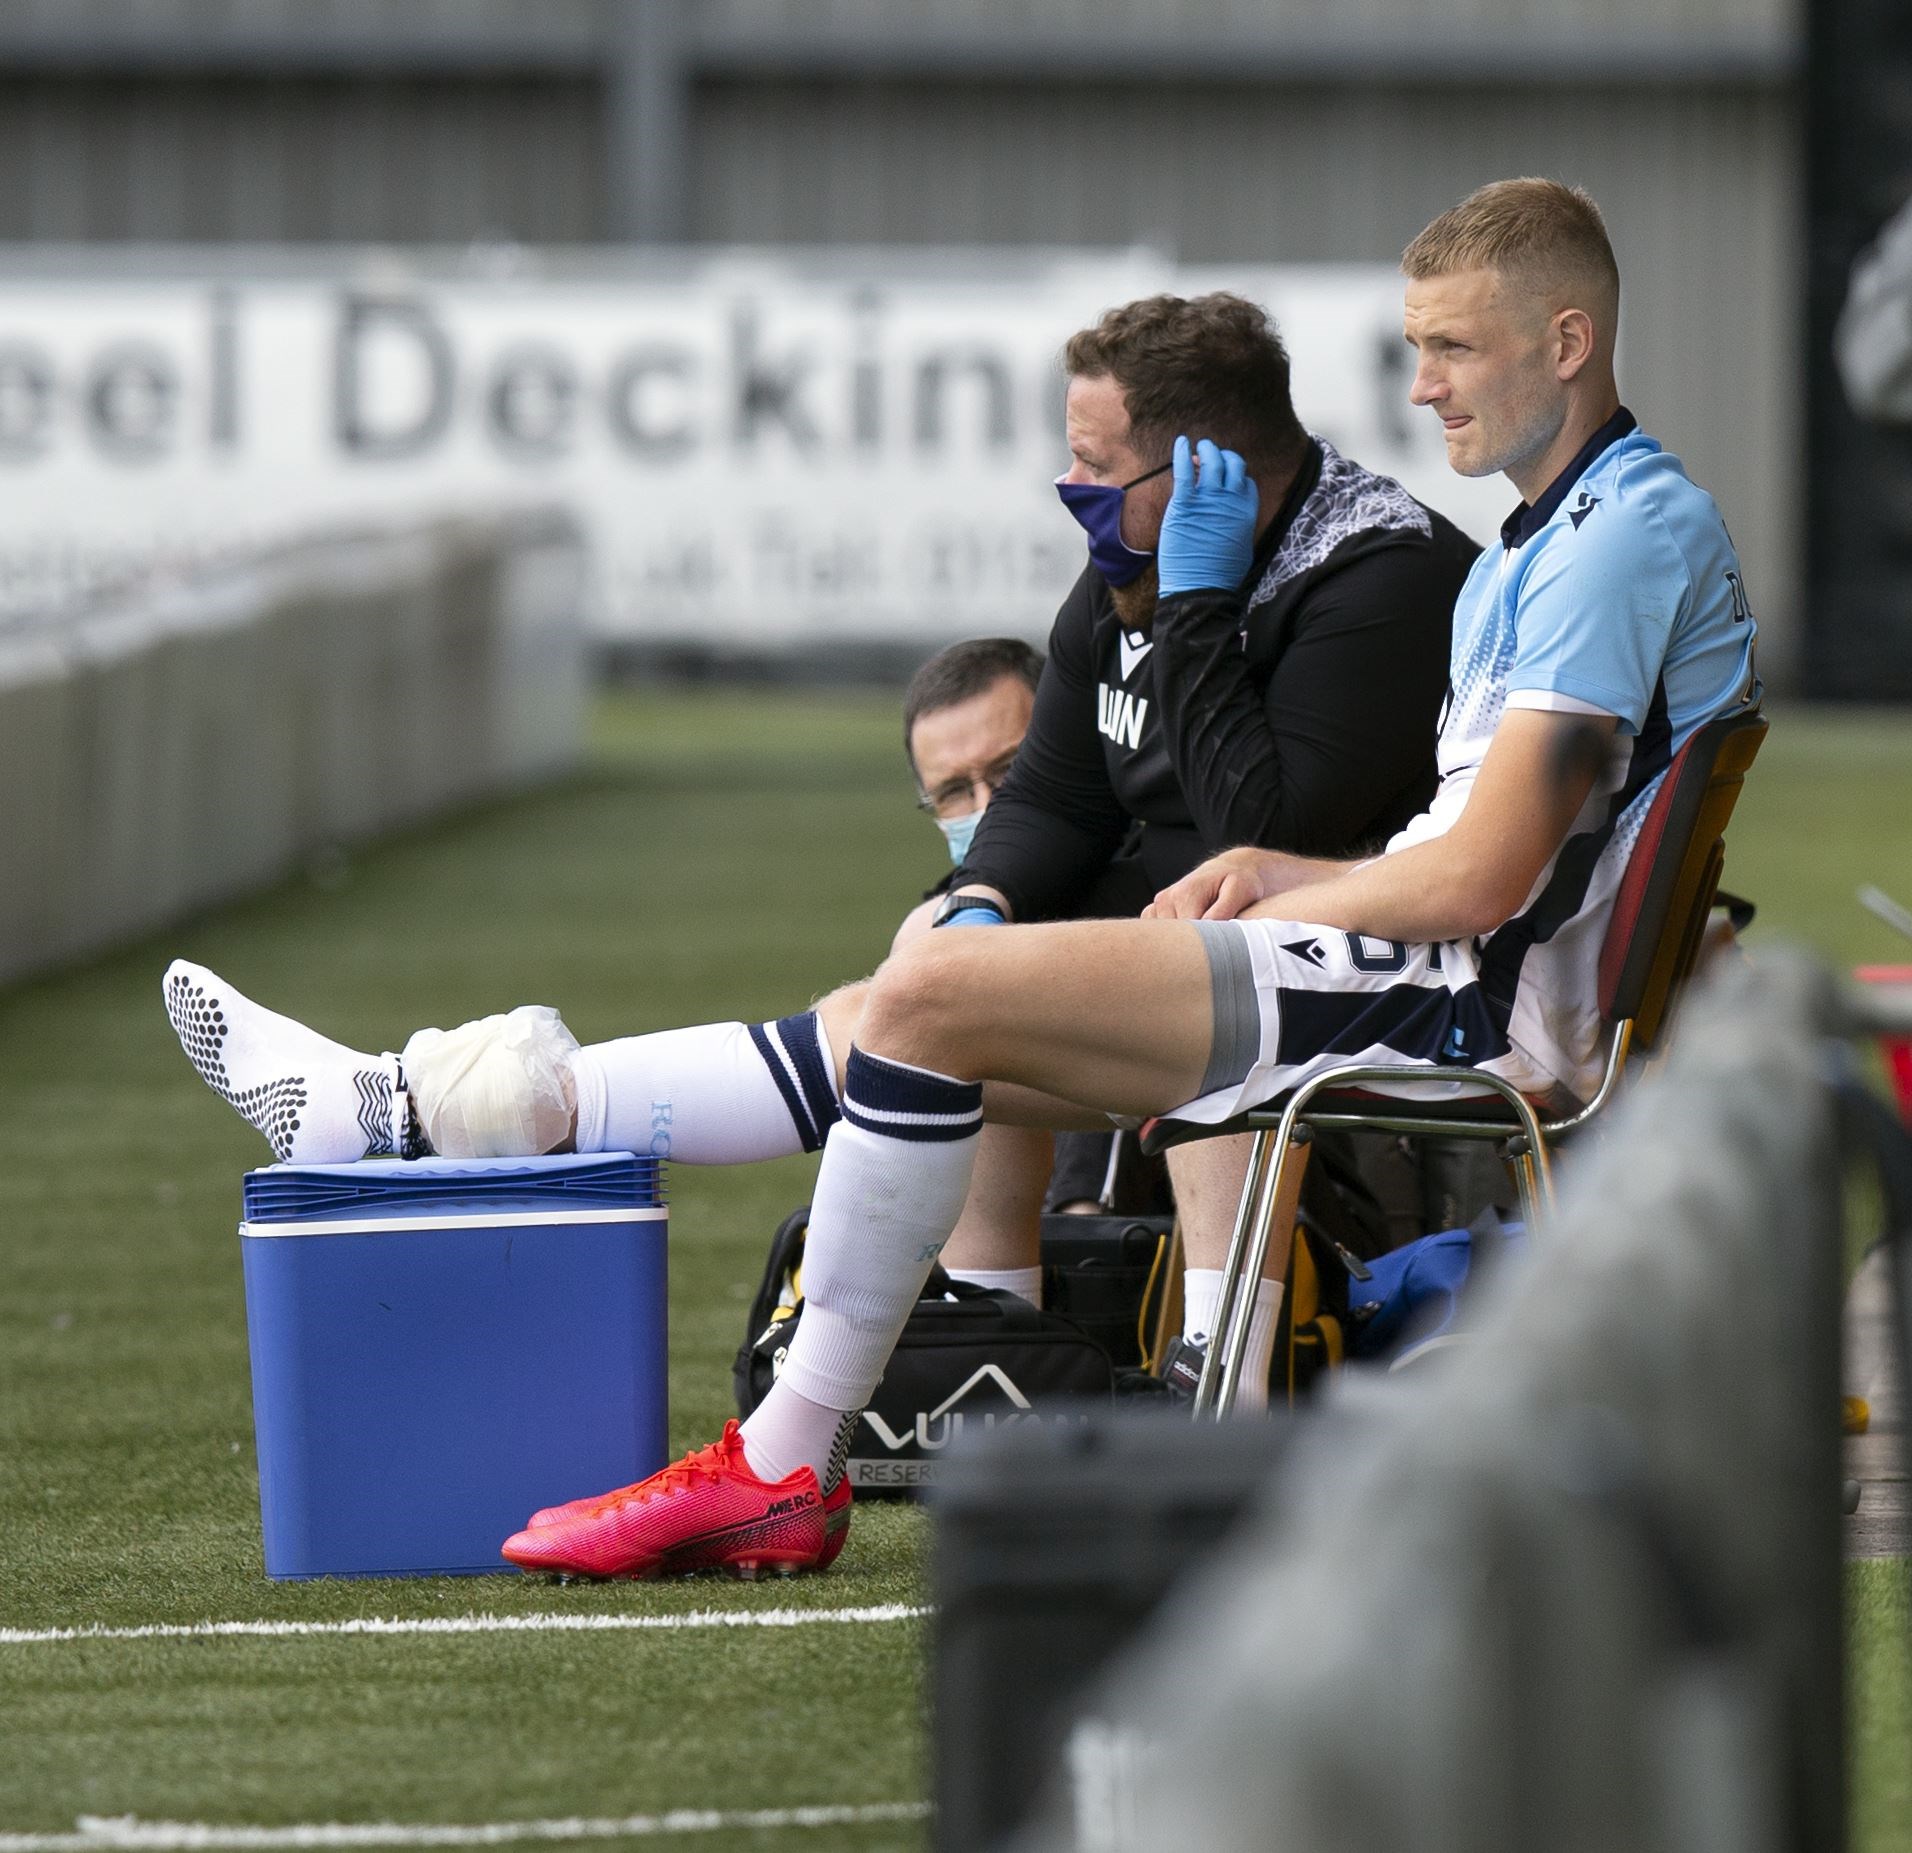 Picture - Ken Macpherson, Inverness. St. Mirren(1) v Ross County(1). 22.08.20. Ross County's Coll Donaldson after suffering a serious-looking first-half injury.